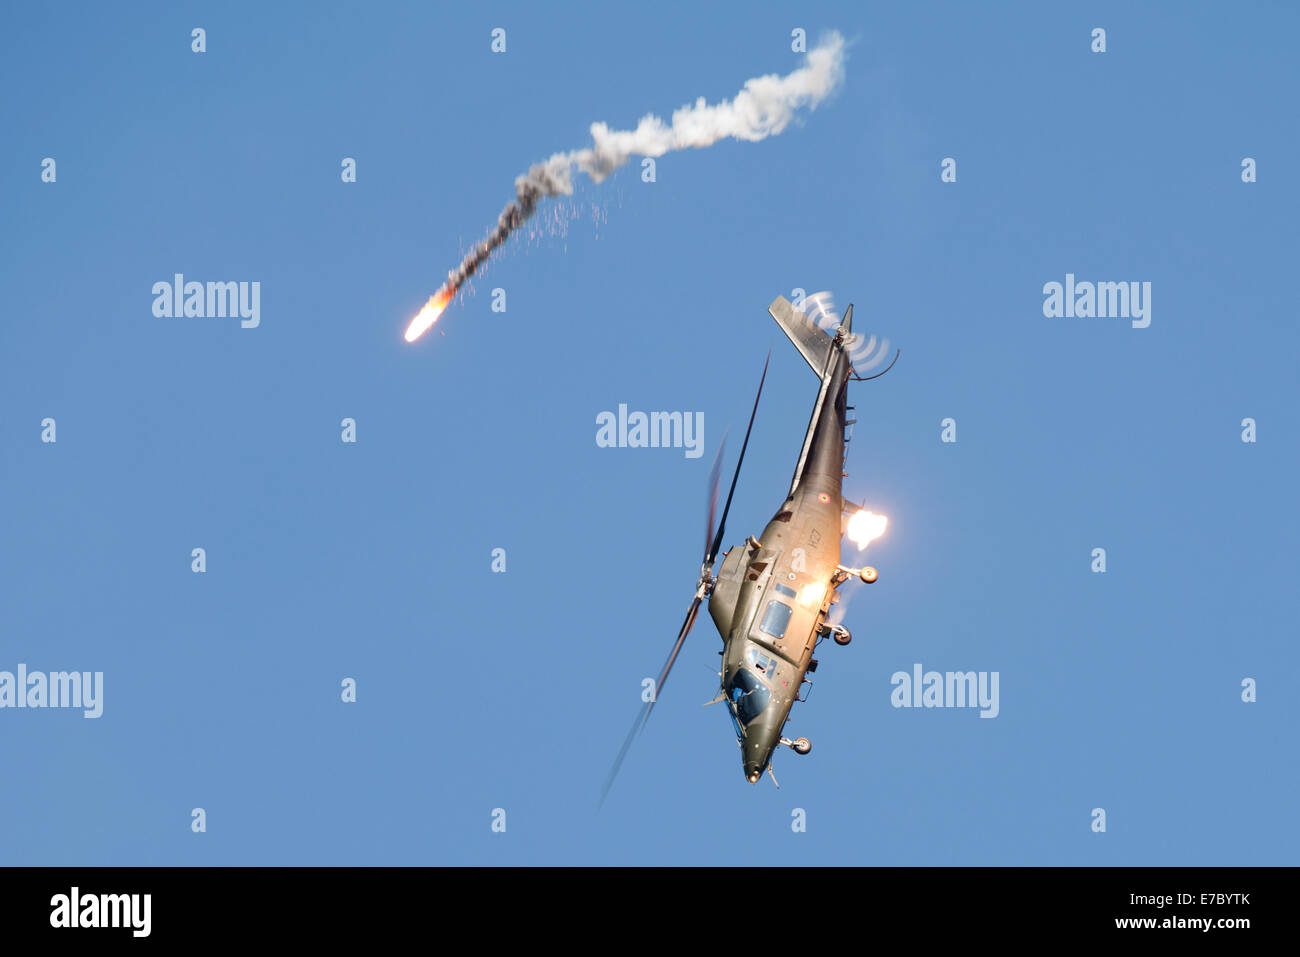 PAYERNE, SWITZERLAND - SEPTEMBER 6: Agusta A-109 releases flares on dynamic display at AIR14 airshow in Payerne, Switzerland Stock Photo